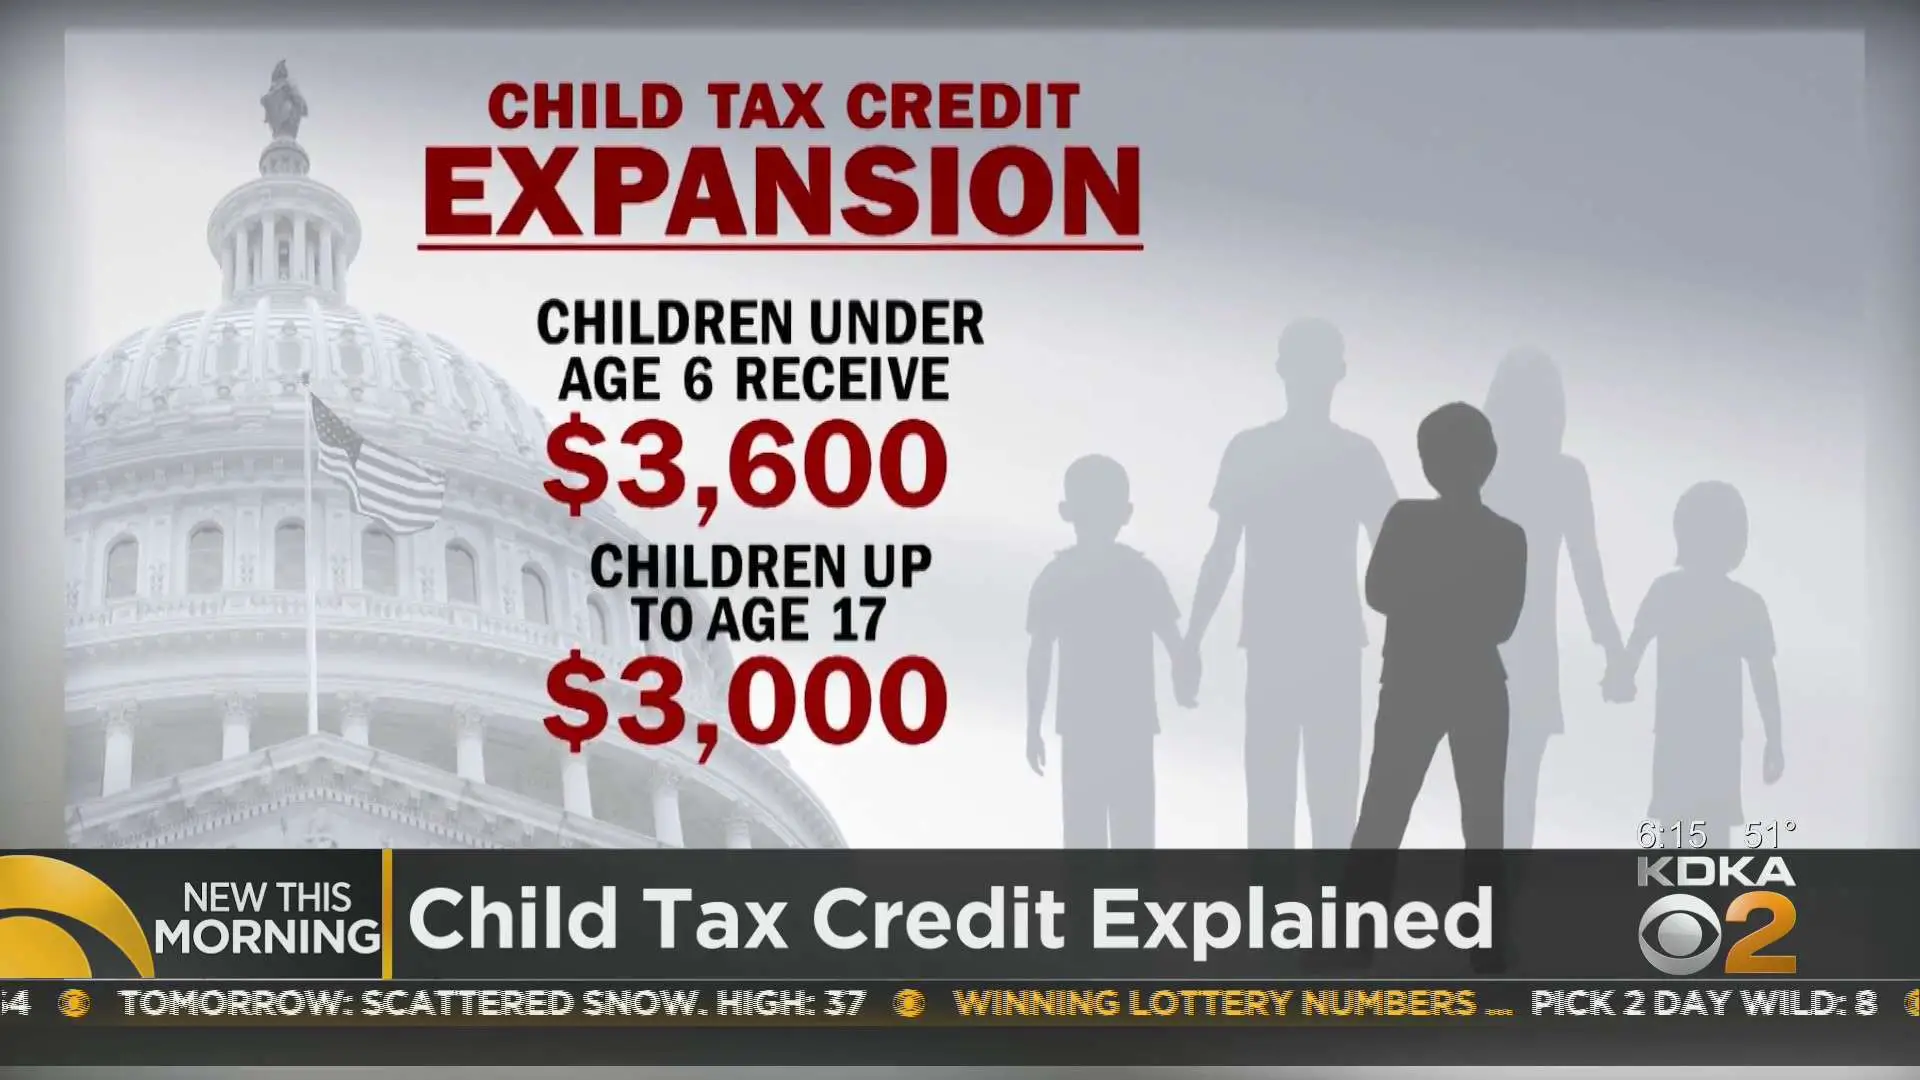 How Much Money Can Parents Expect With The Tax Credit?